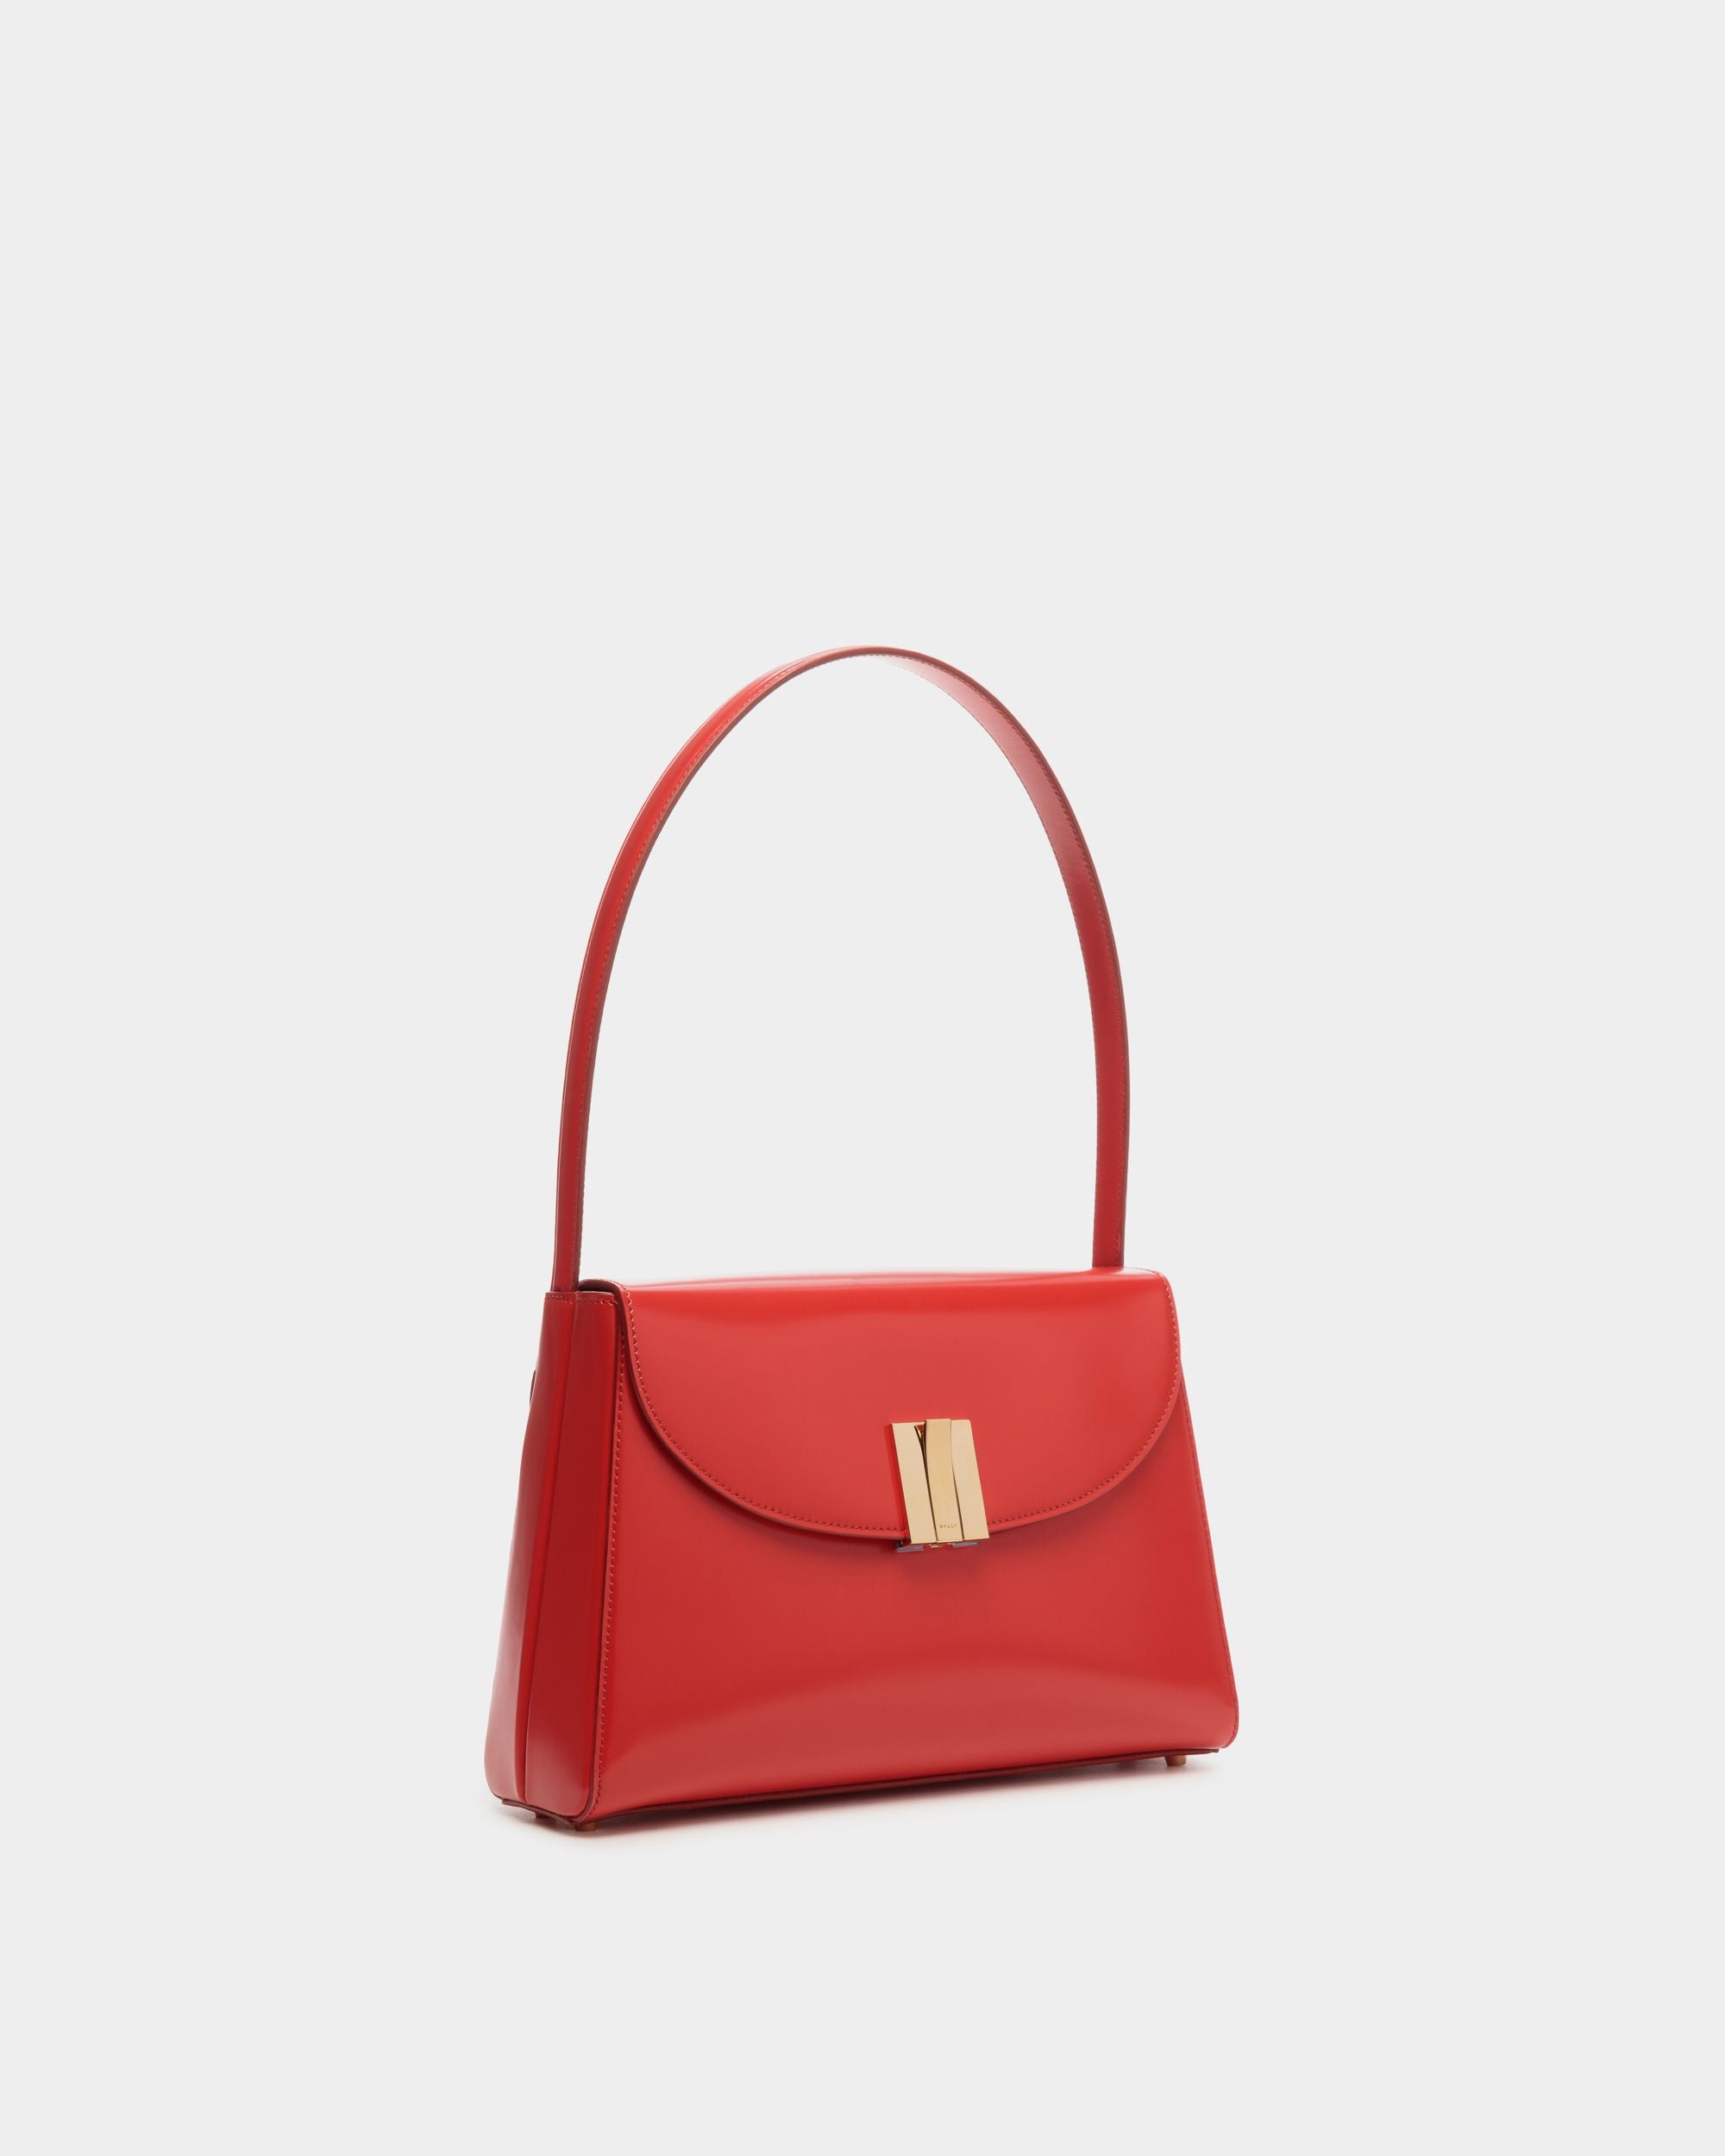 Ollam | Women's Shoulder Bag in Candy Red Brushed Leather | Bally | Still Life 3/4 Front